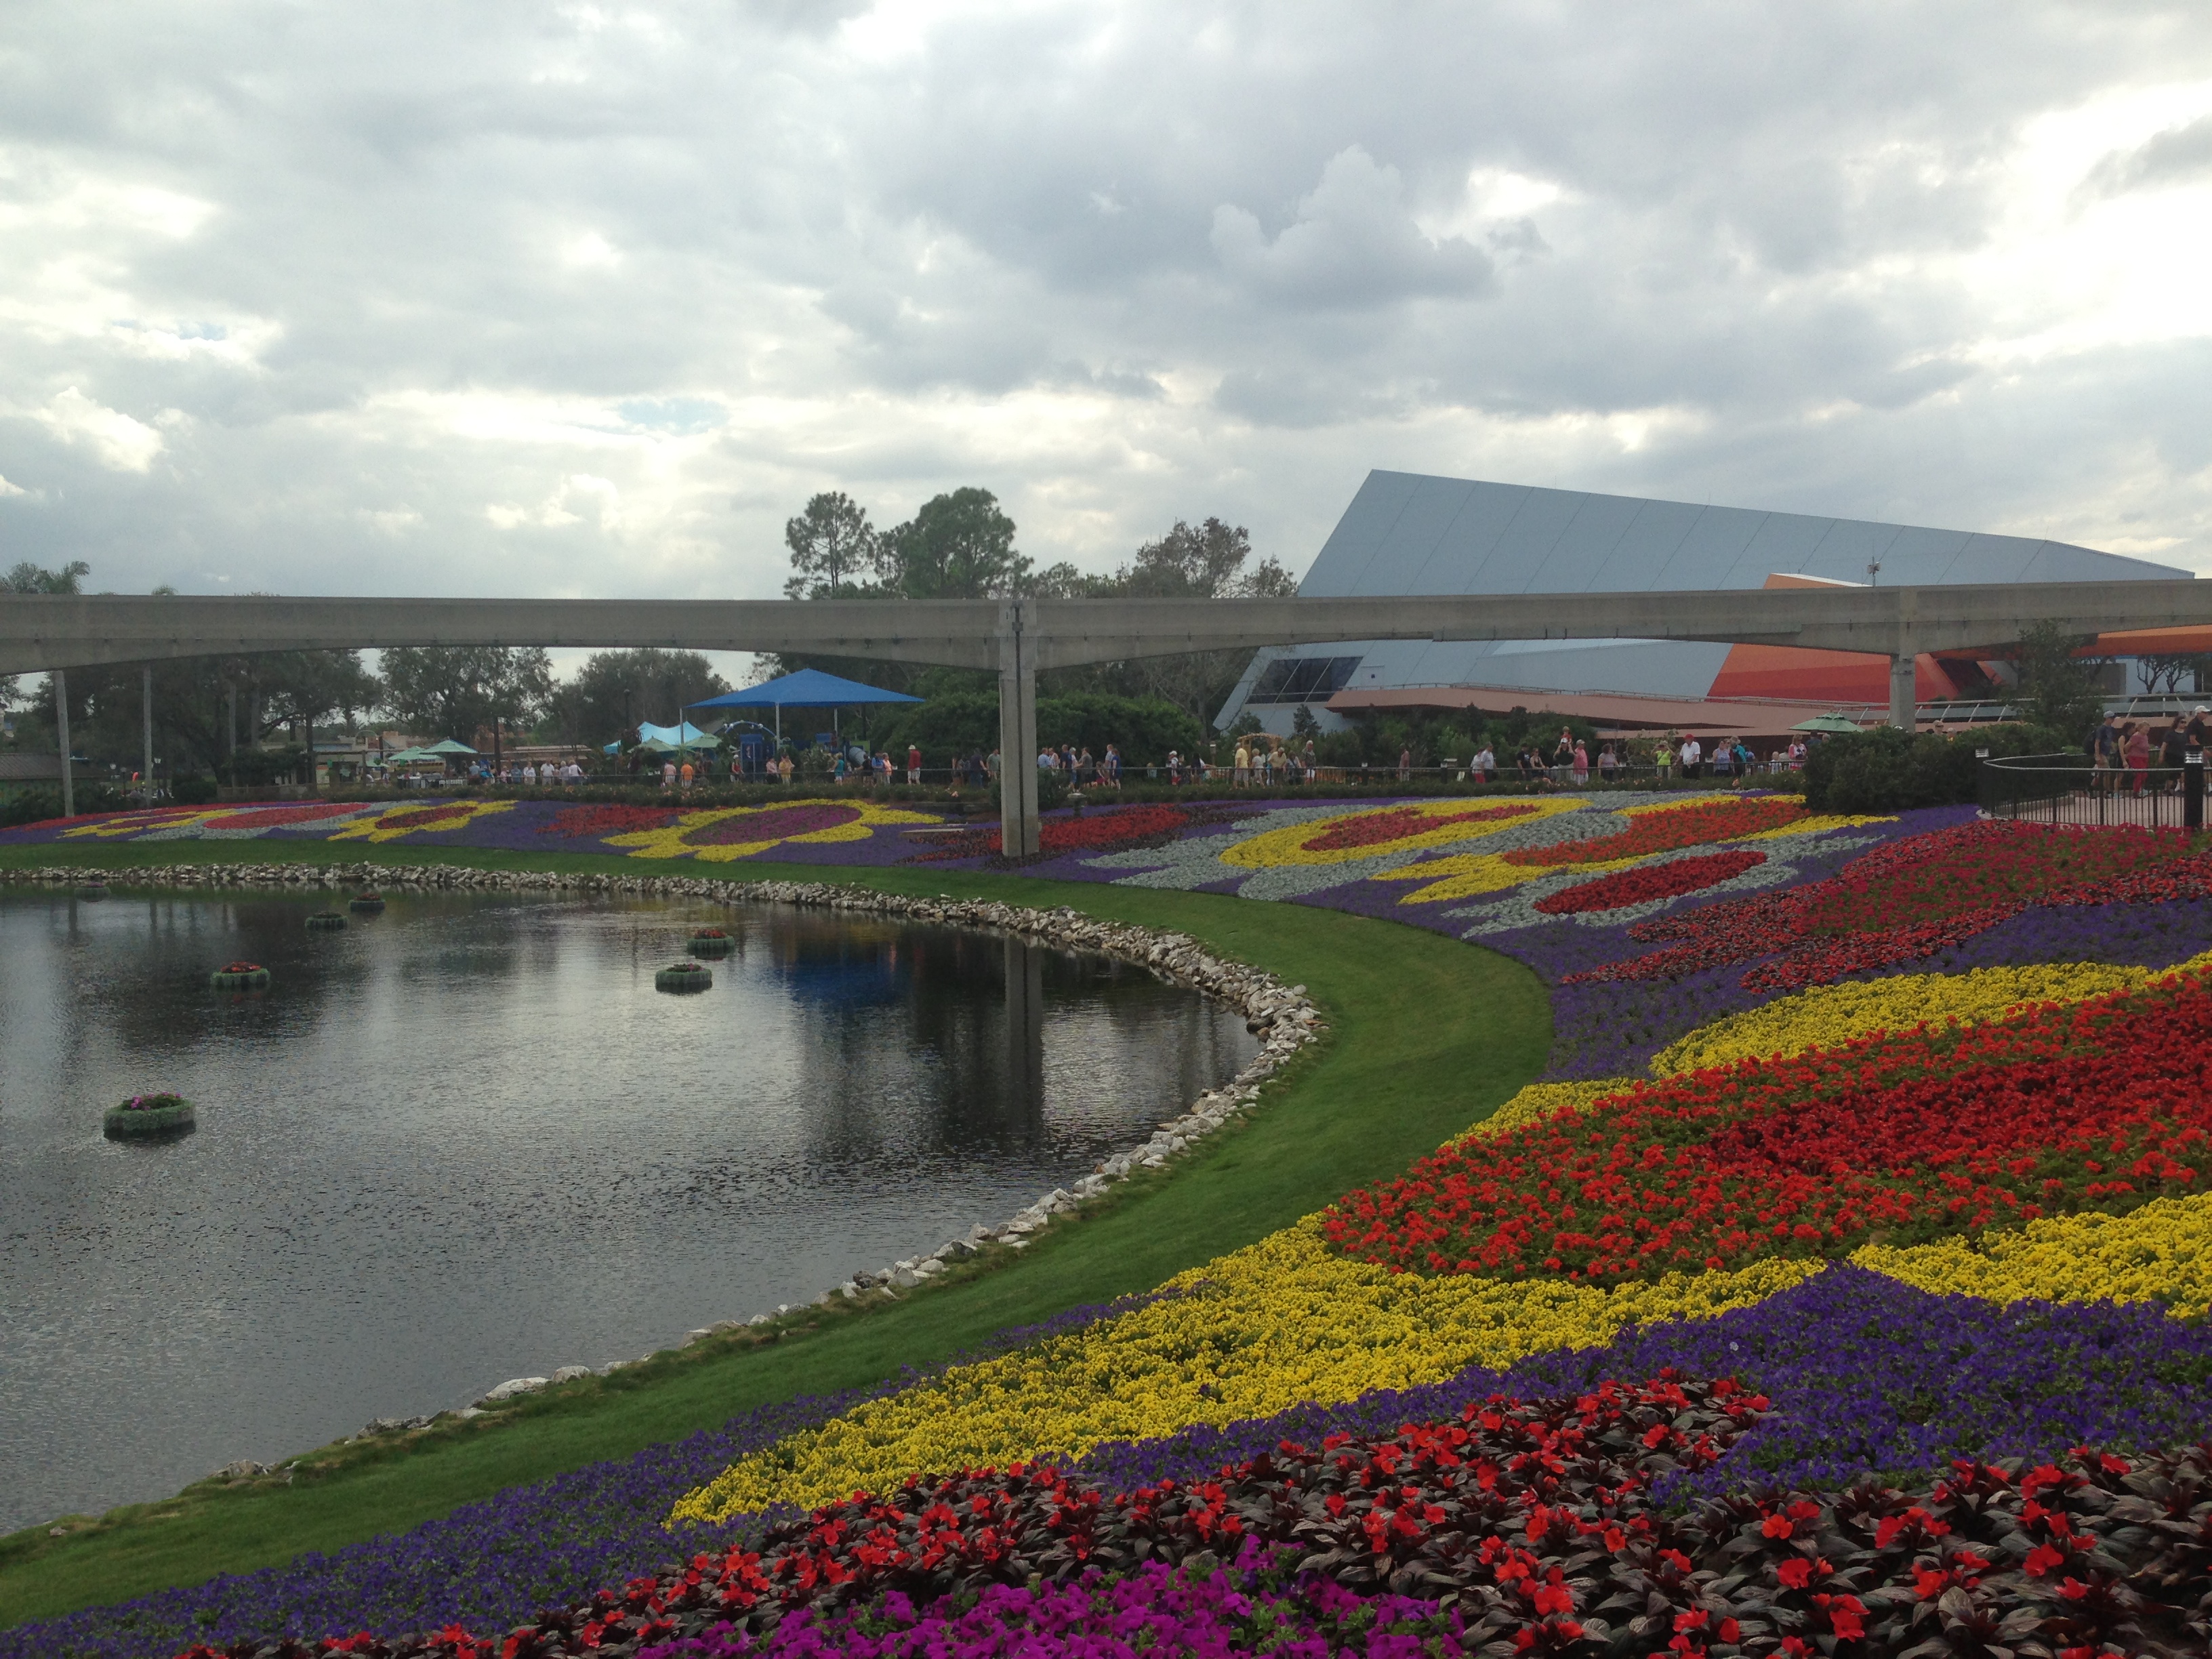 What To Expect From the Epcot International Flower & Garden Festival